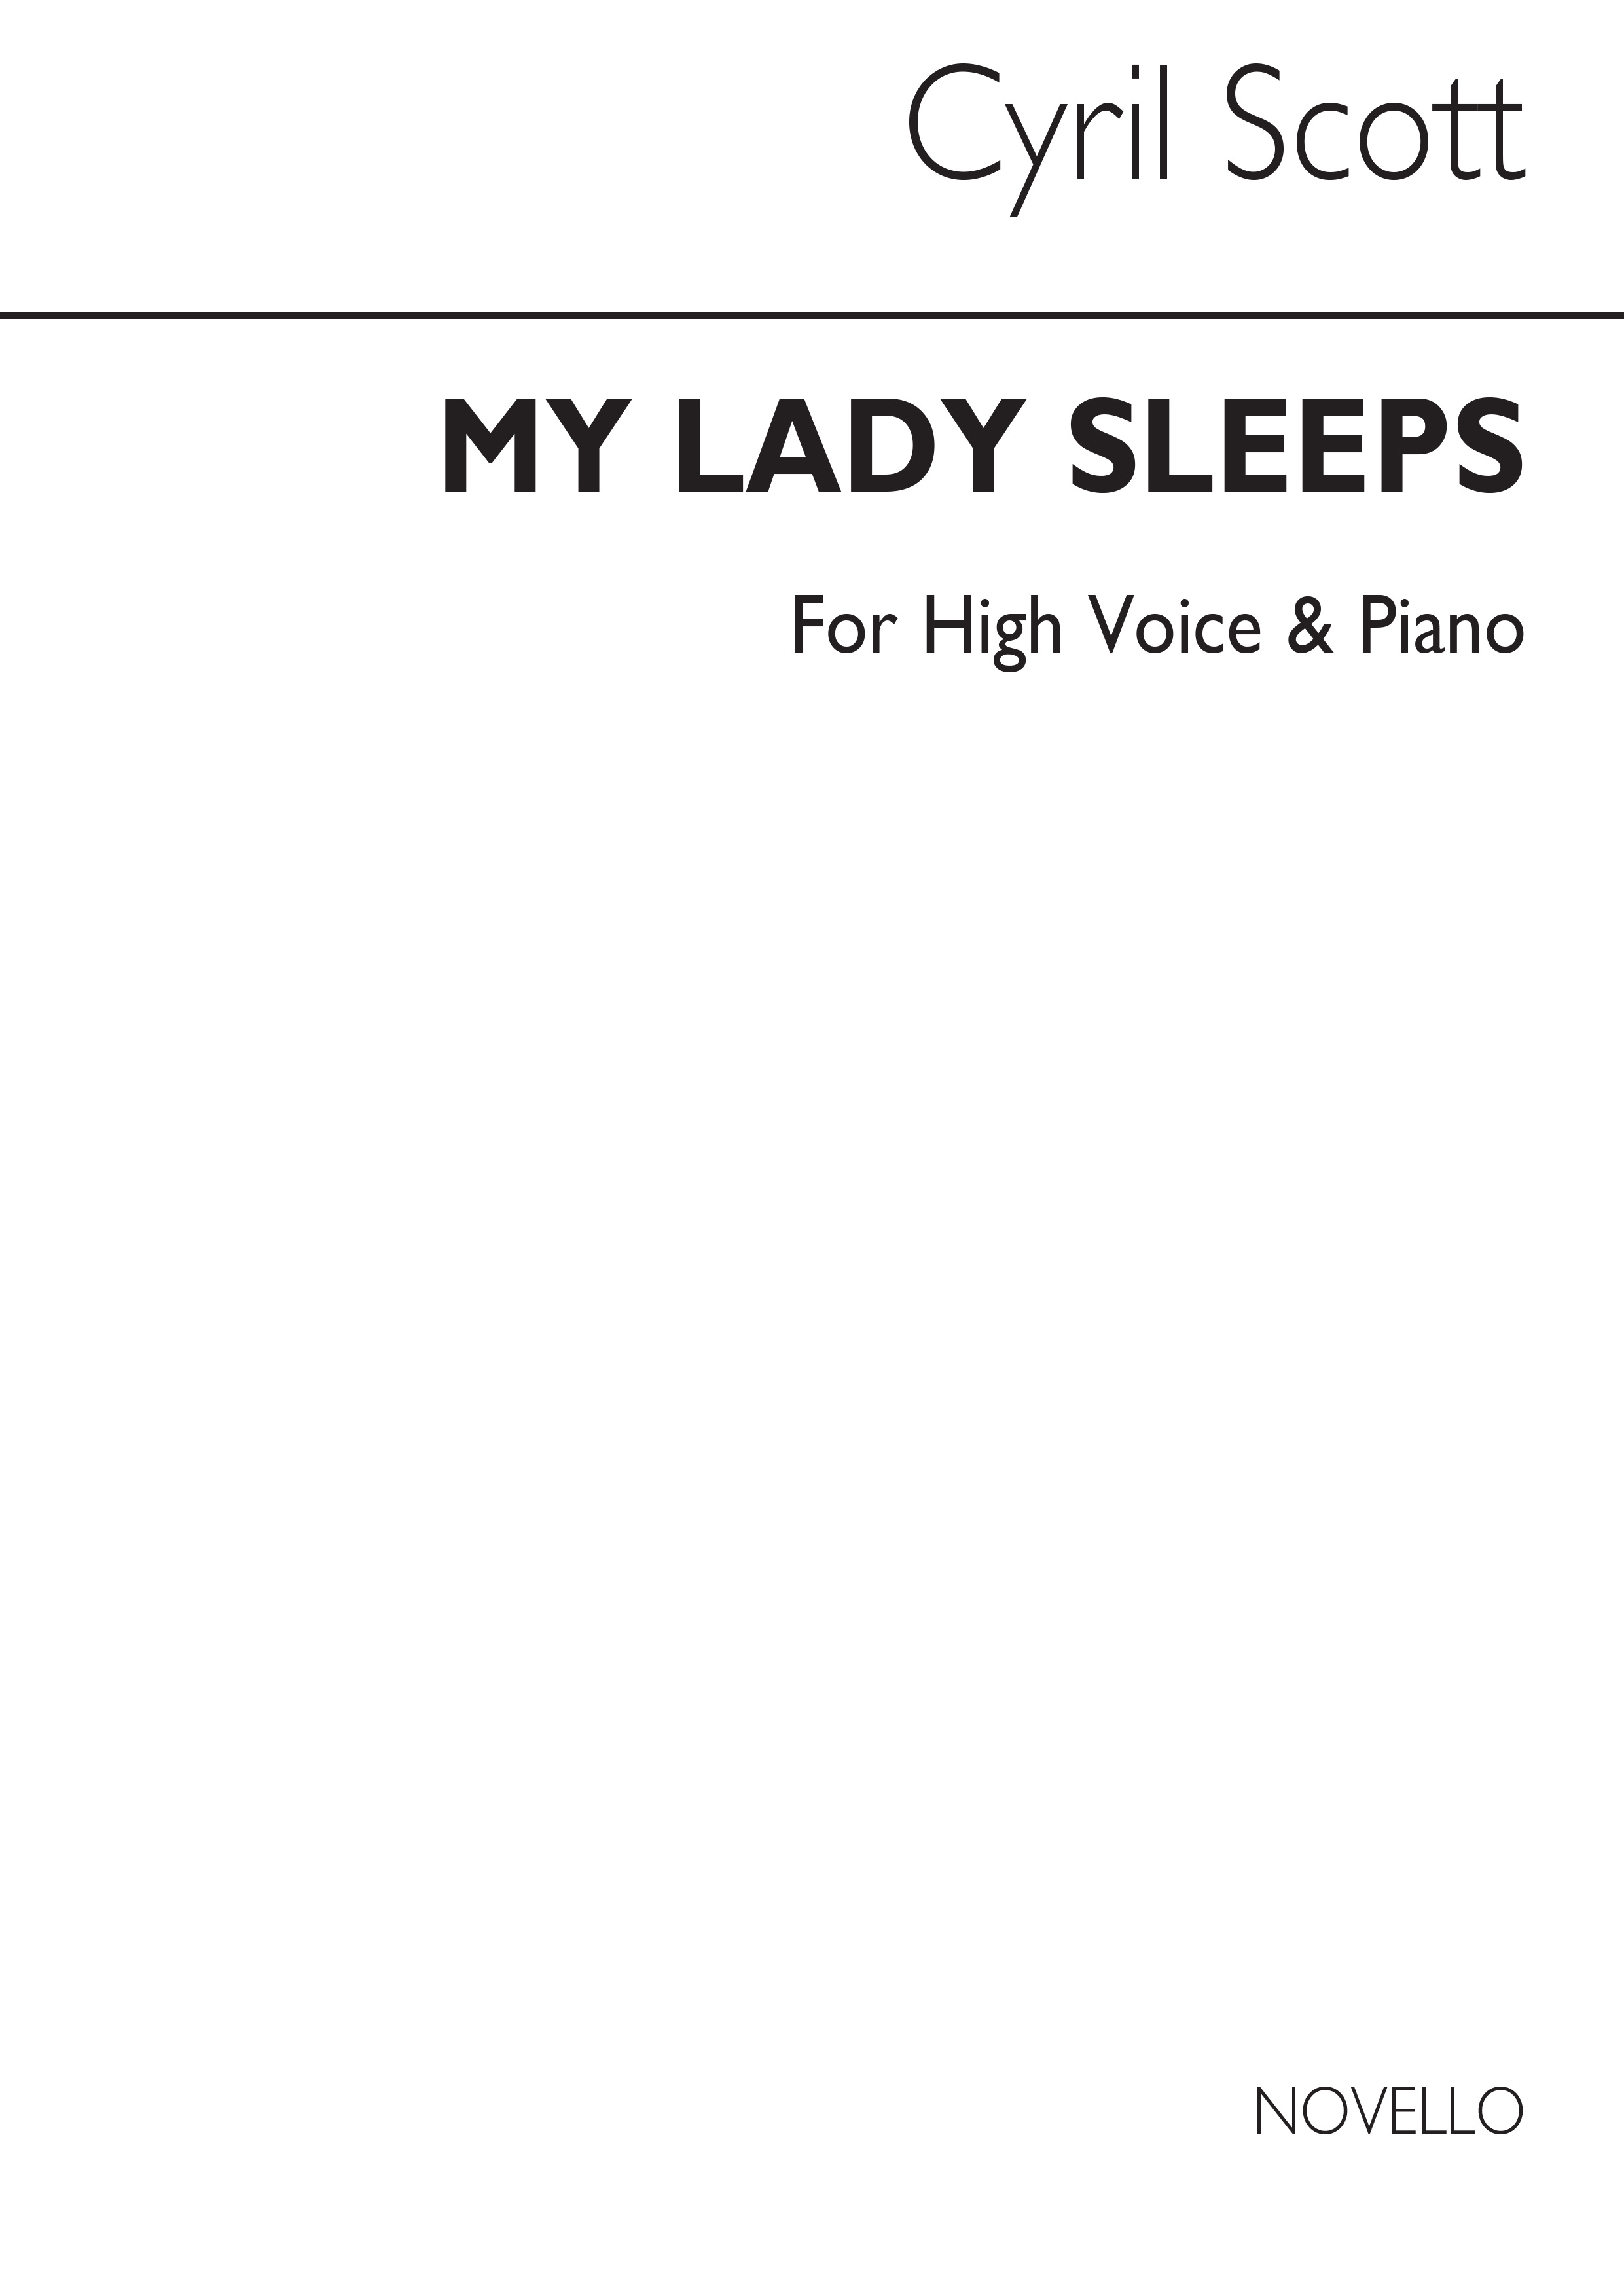 Cyril Scott: My Lady Sleeps Op70 No.1-high Voice/Piano: High Voice: Vocal Work